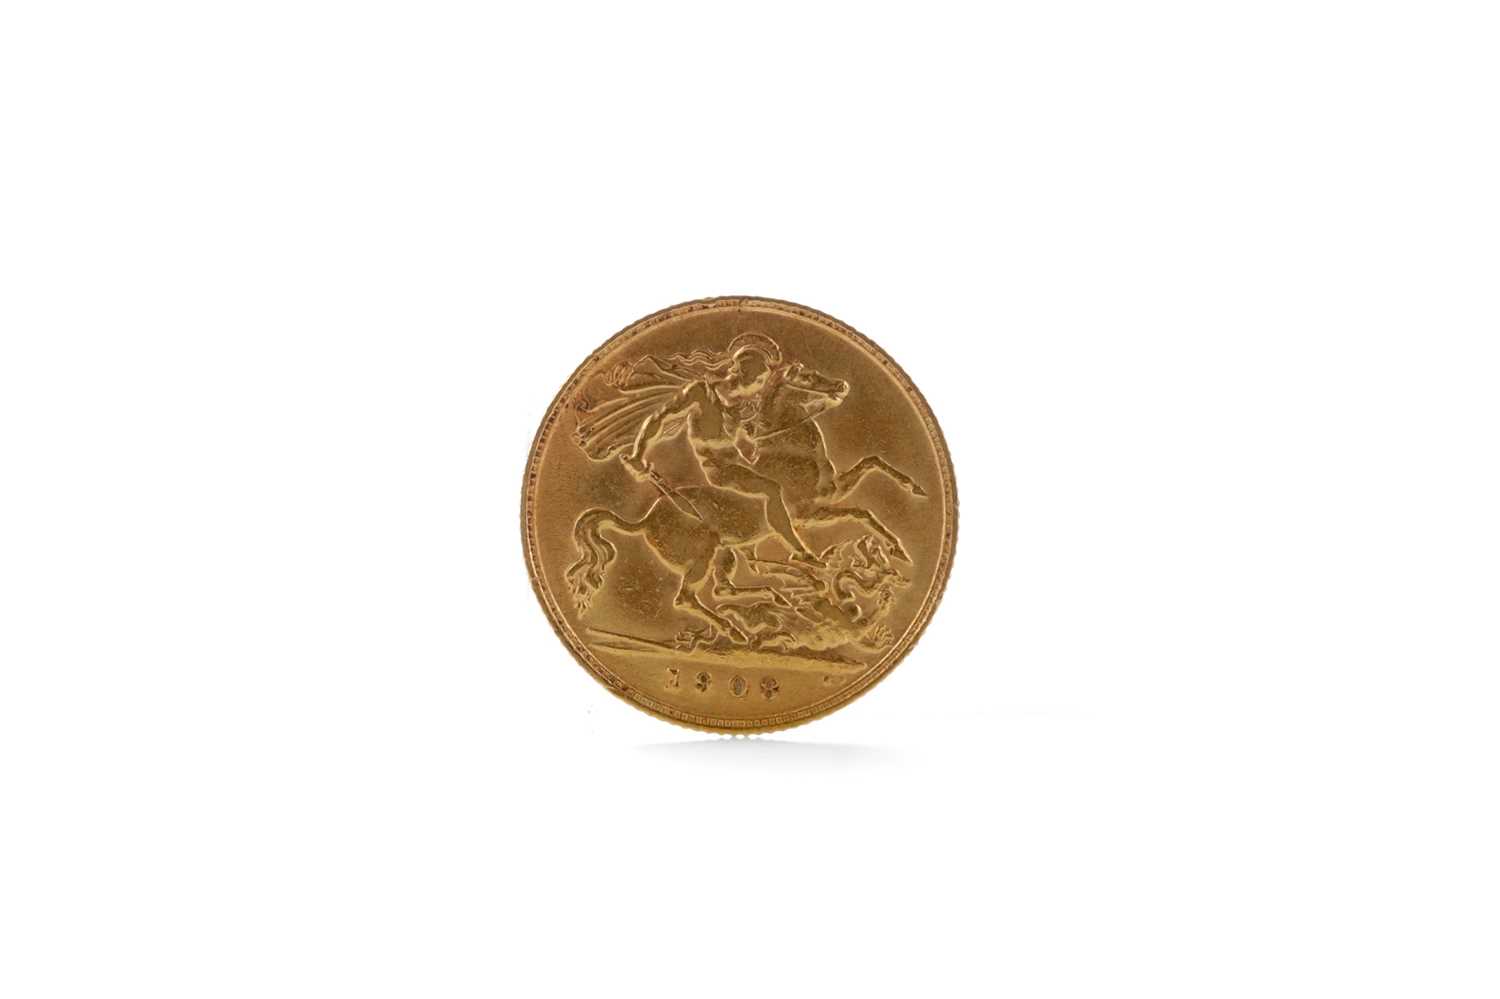 Lot 42 - A GOLD HALF SOVEREIGN DATED 1908